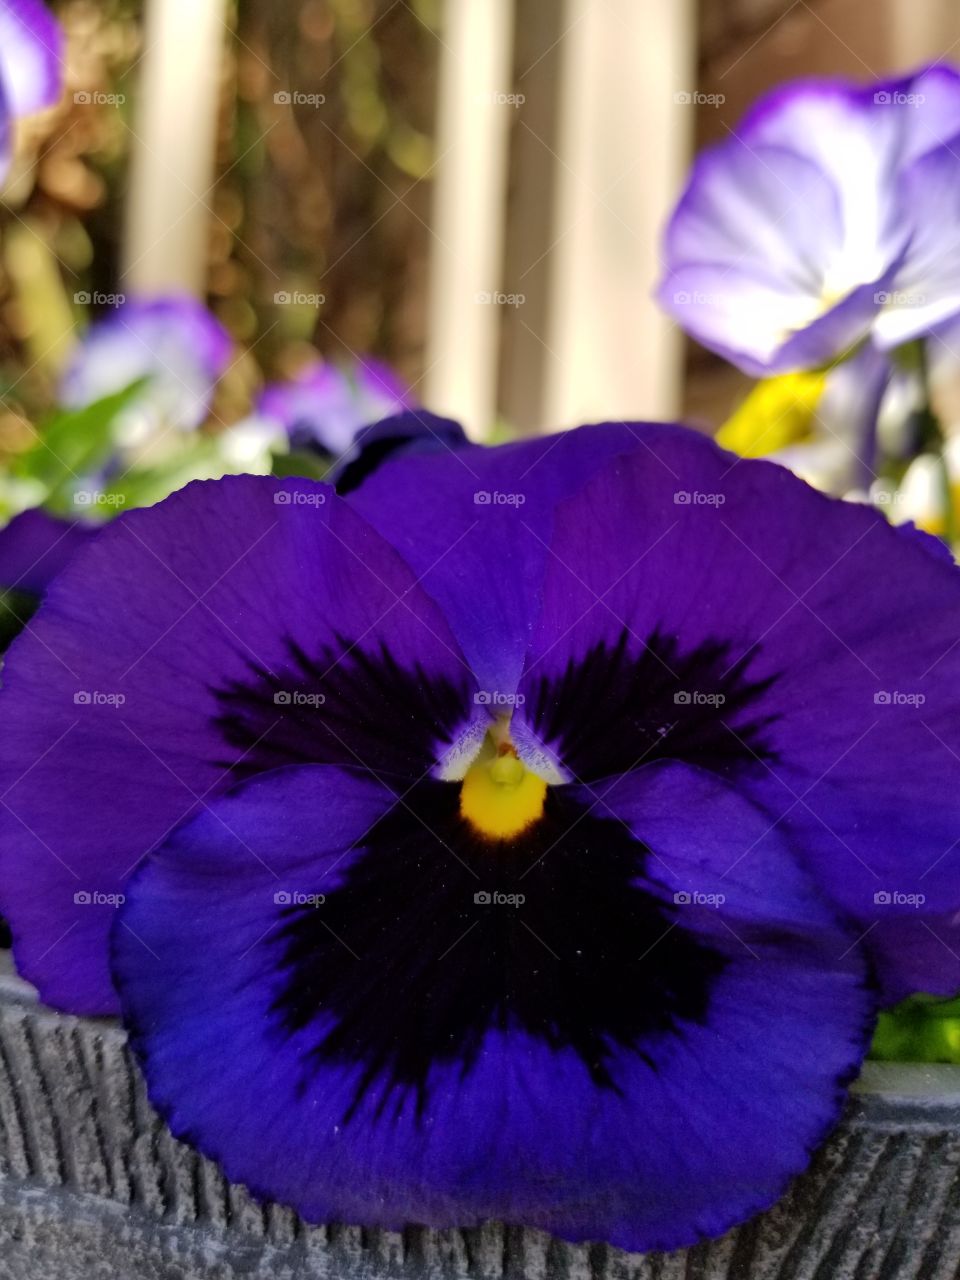 This is a beautiful purple pansy with big eye brows and nice mushstashe to show and